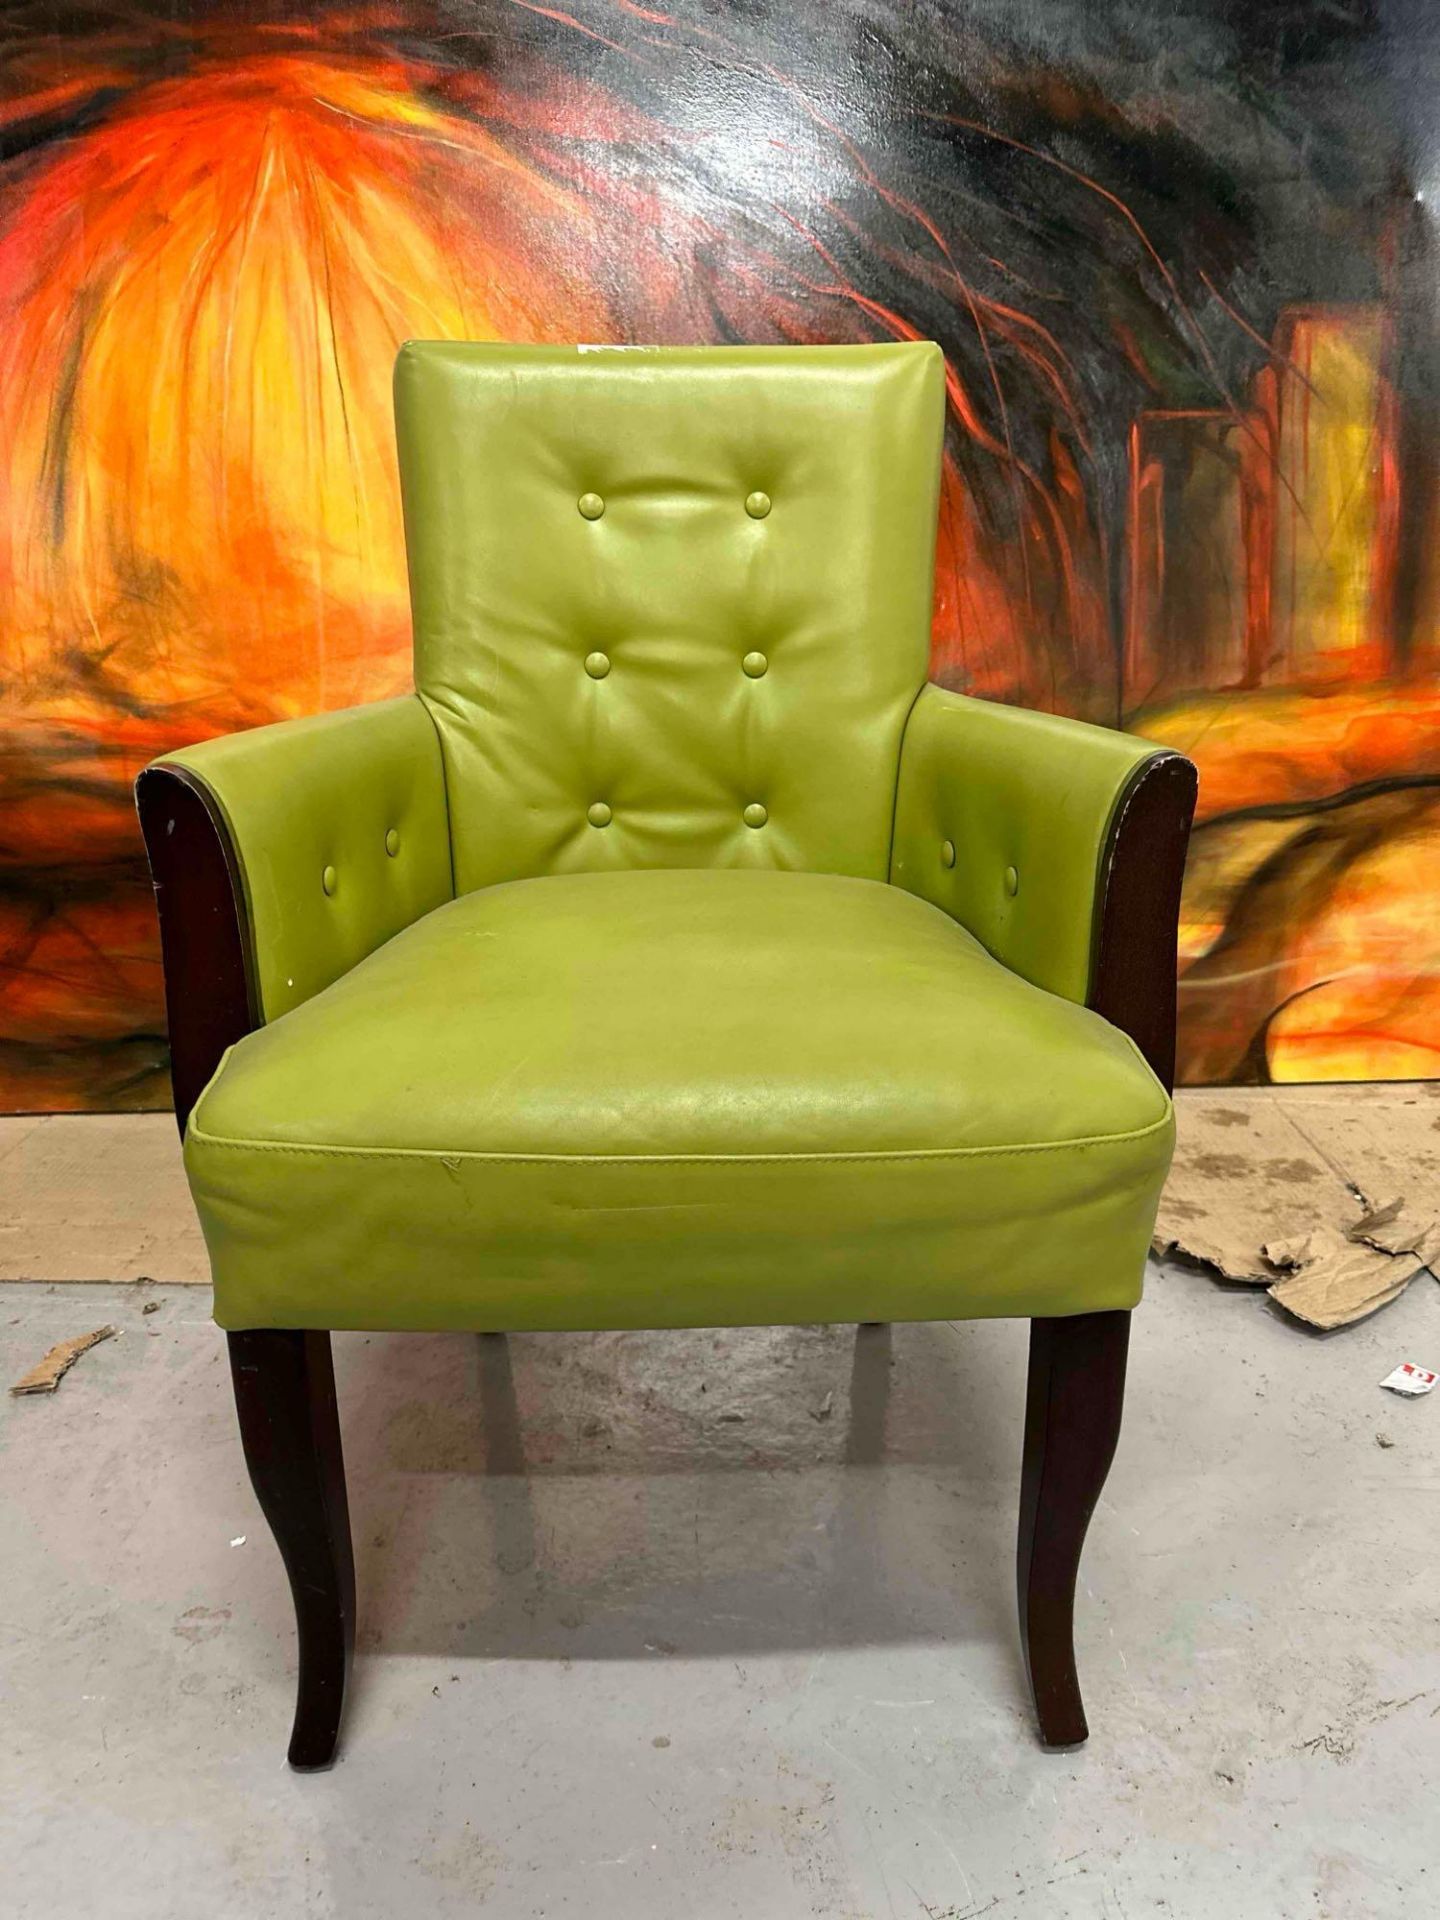 Colber International Lime Green Leather Armchair With Button Detail On Wooden Frame Enjoy